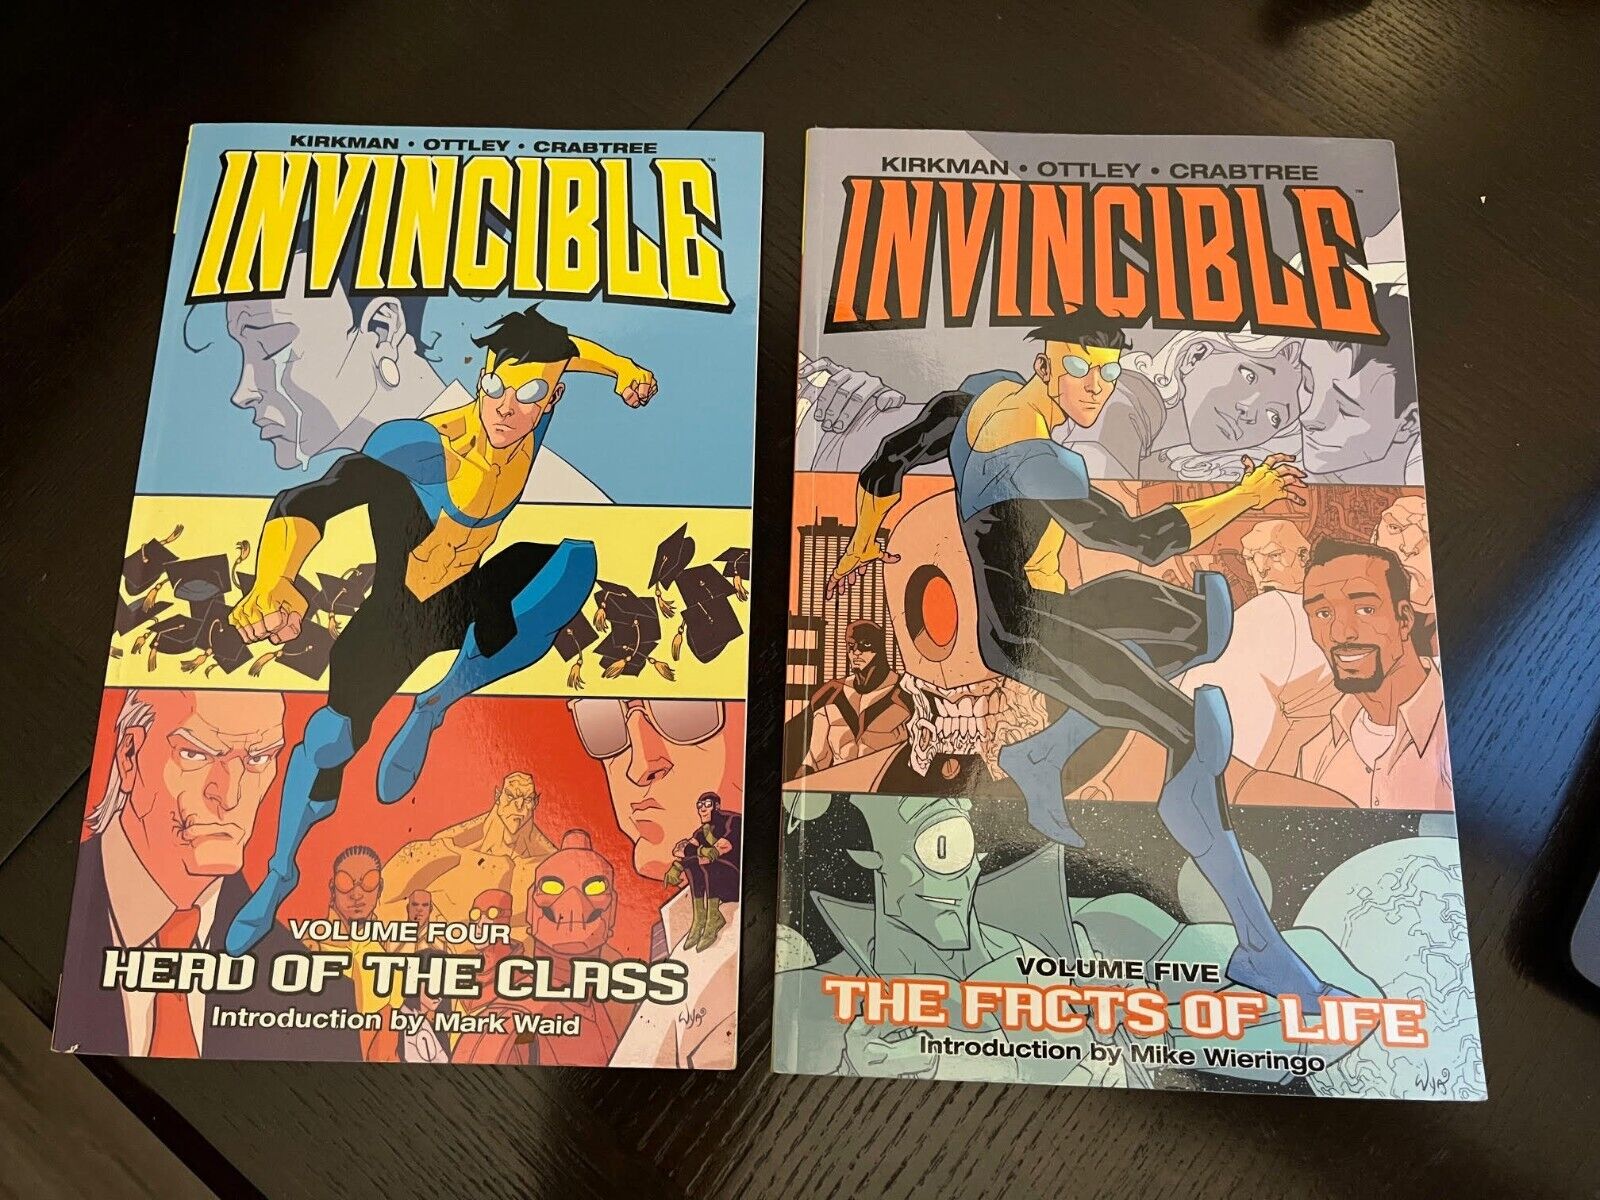 Invincible #4 and #5 by Robert Kirkman, Ottley, and Crabtree